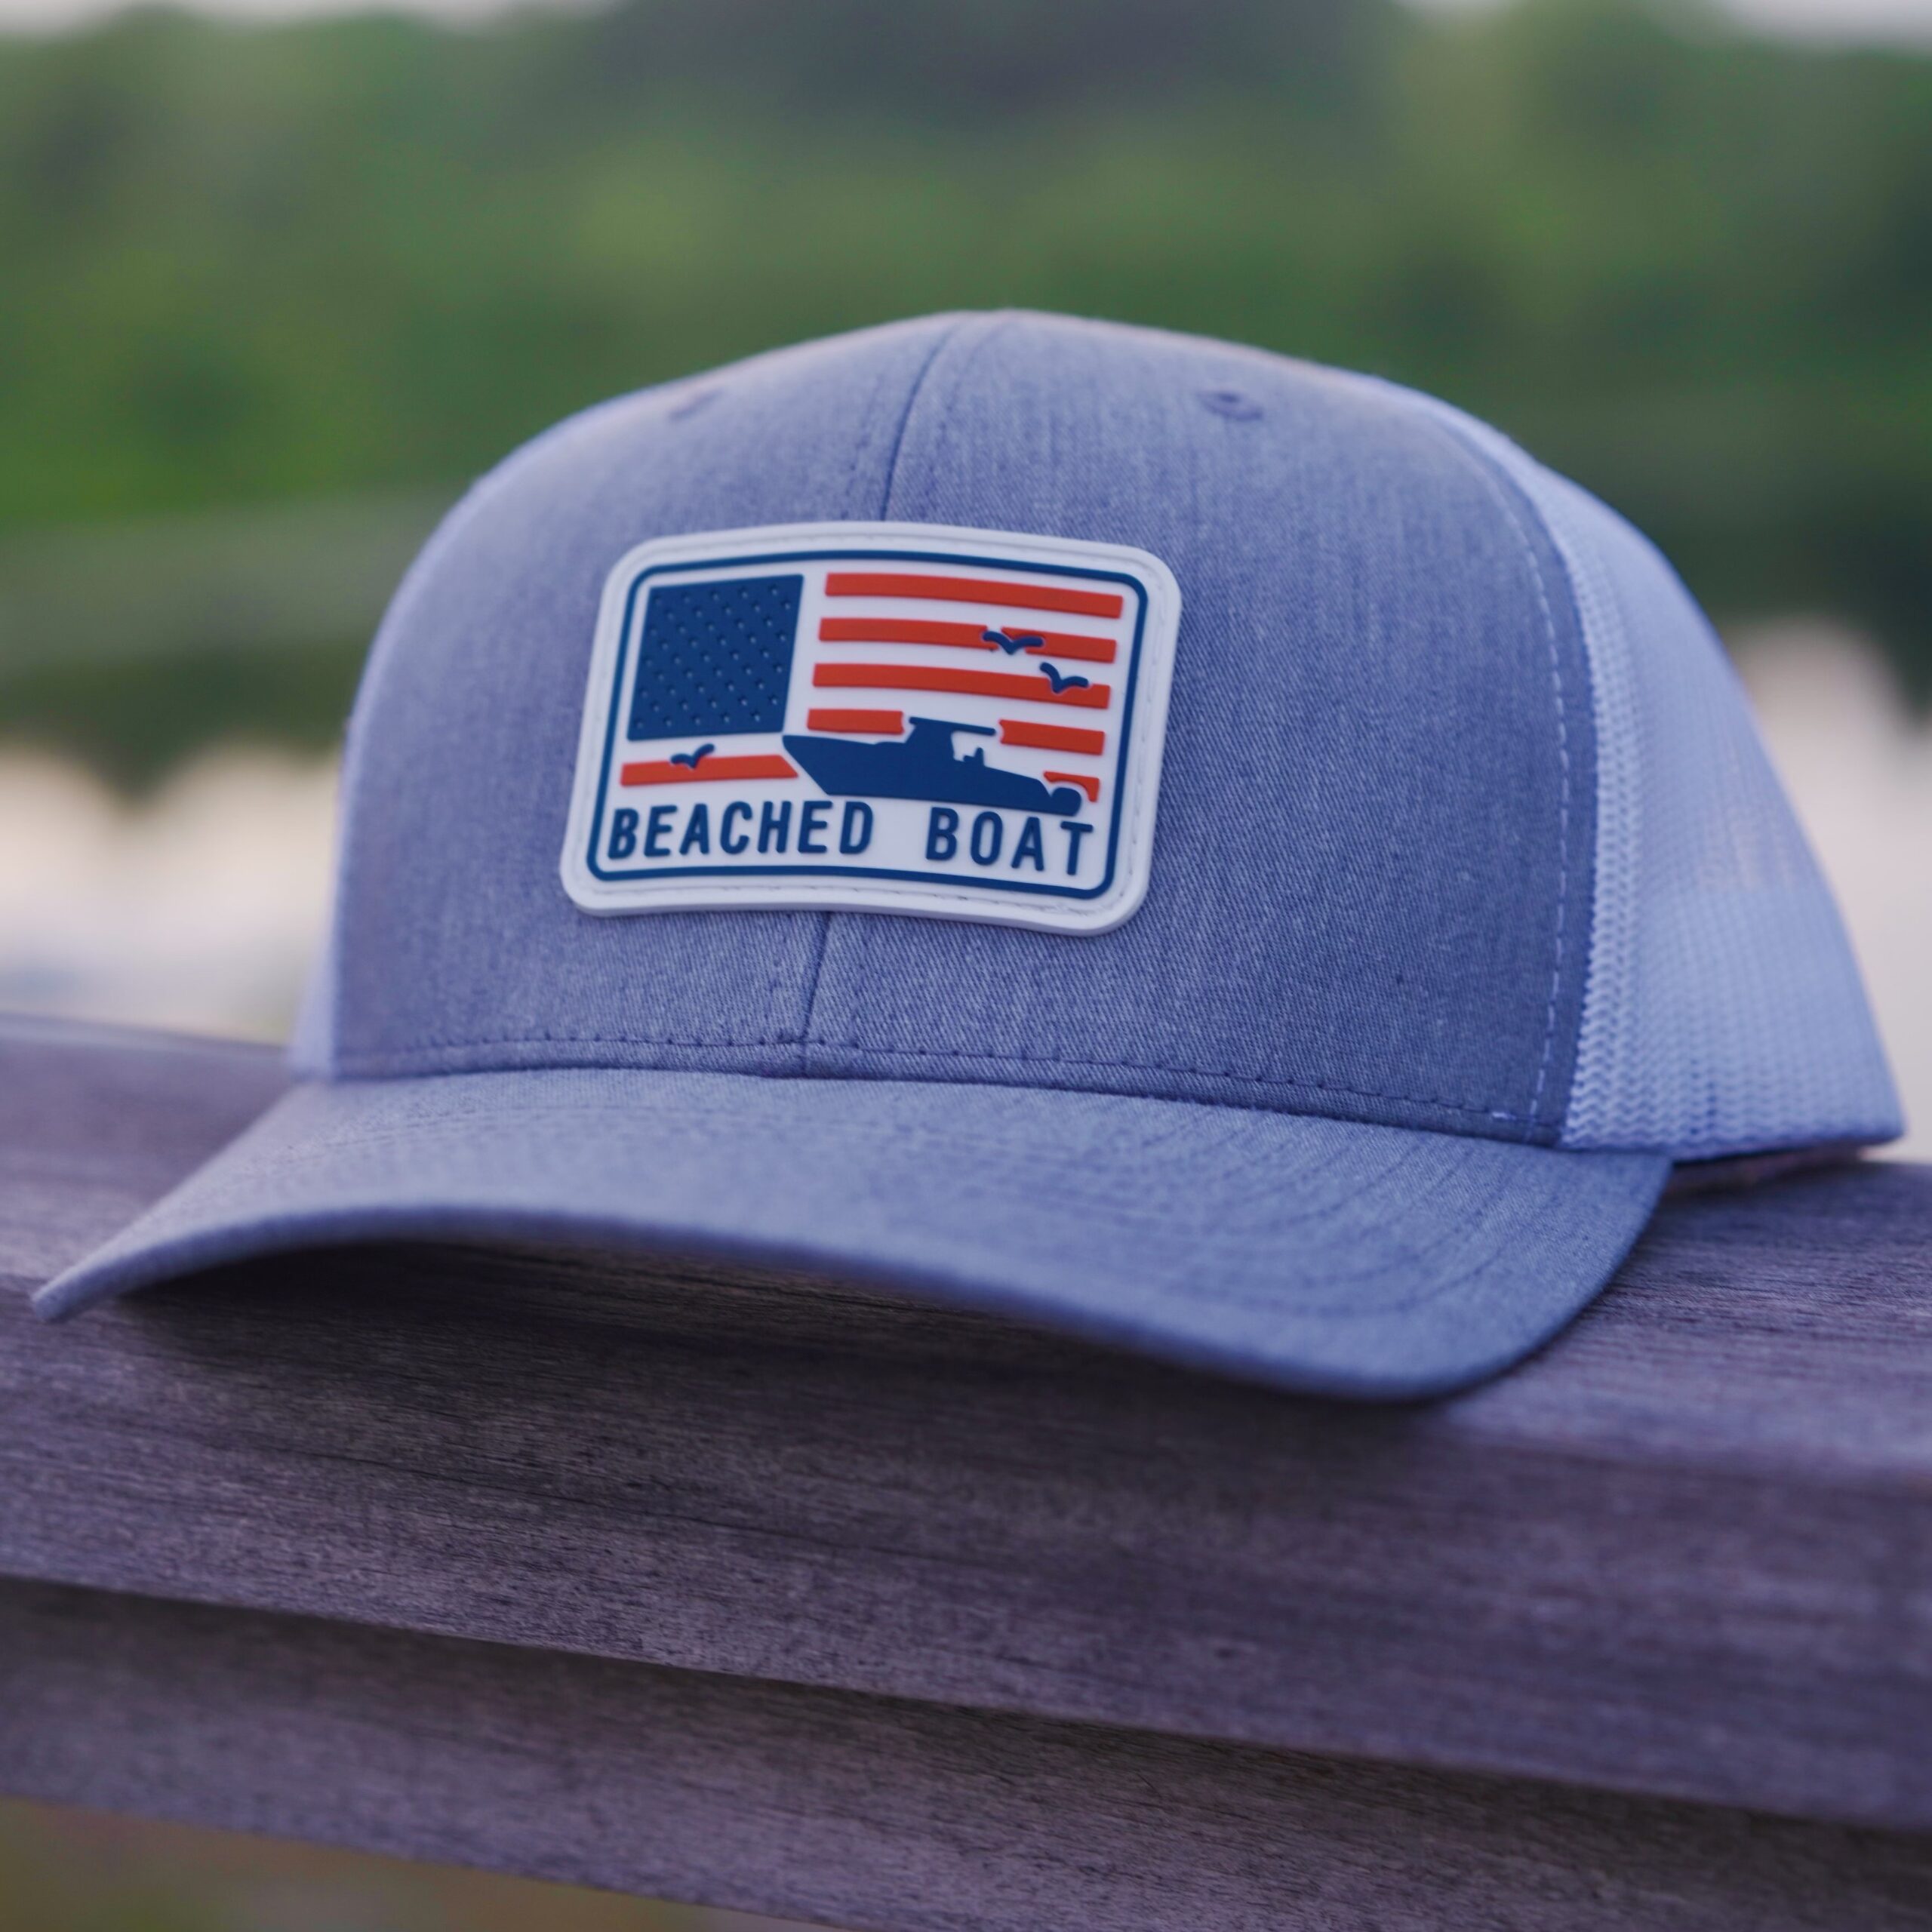 American White/Gray Mesh Hat - Beached Boat Clothing & Apparel